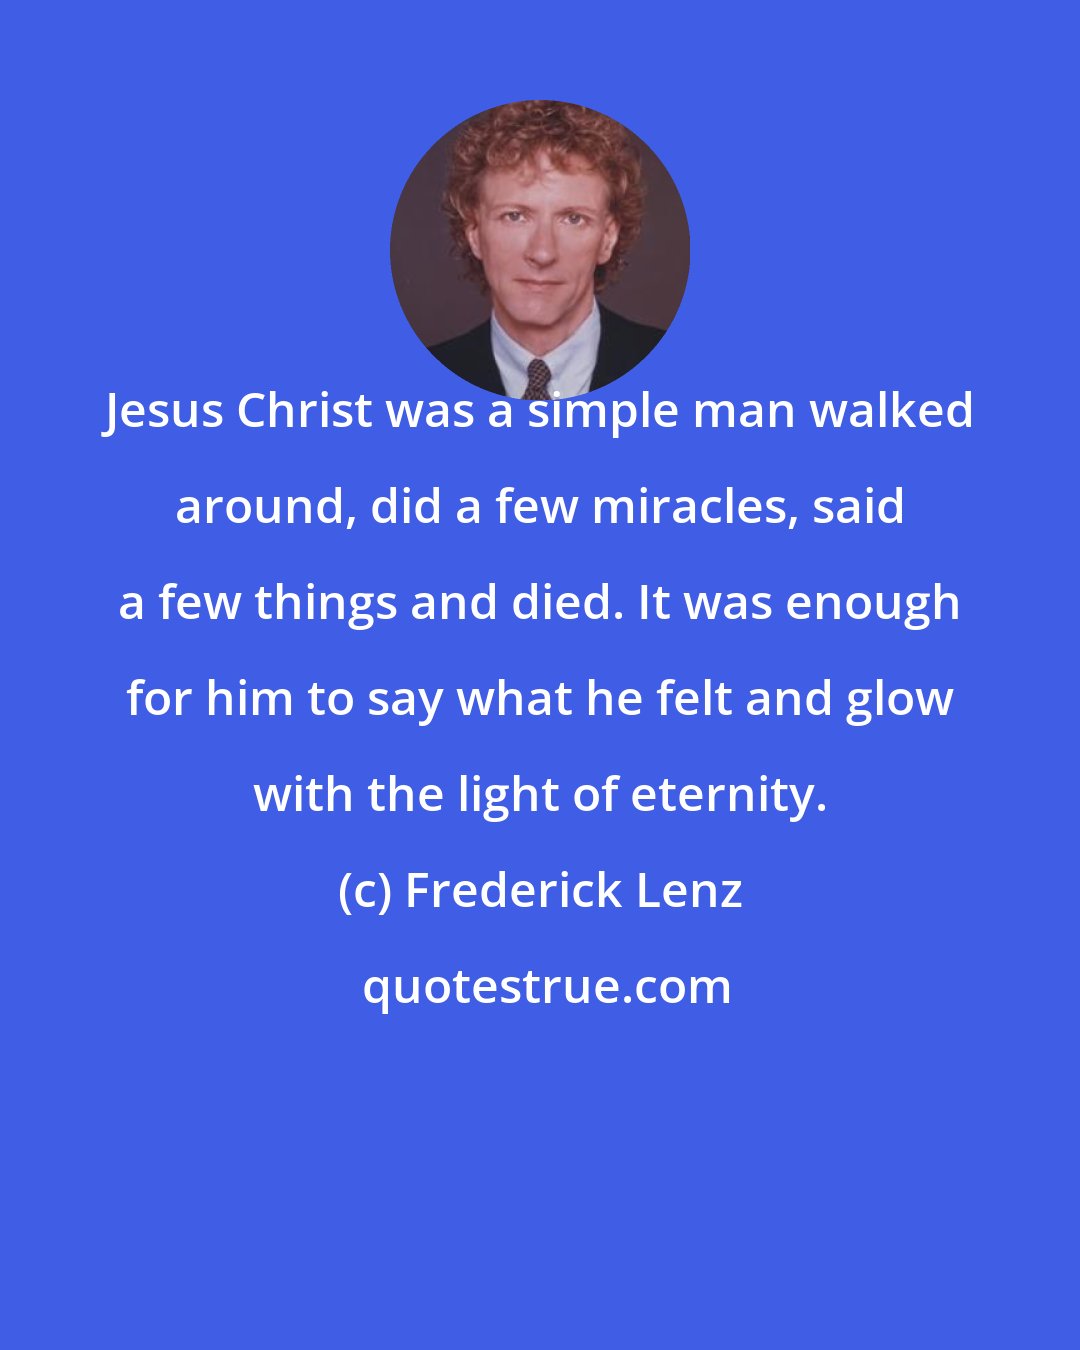 Frederick Lenz: Jesus Christ was a simple man walked around, did a few miracles, said a few things and died. It was enough for him to say what he felt and glow with the light of eternity.